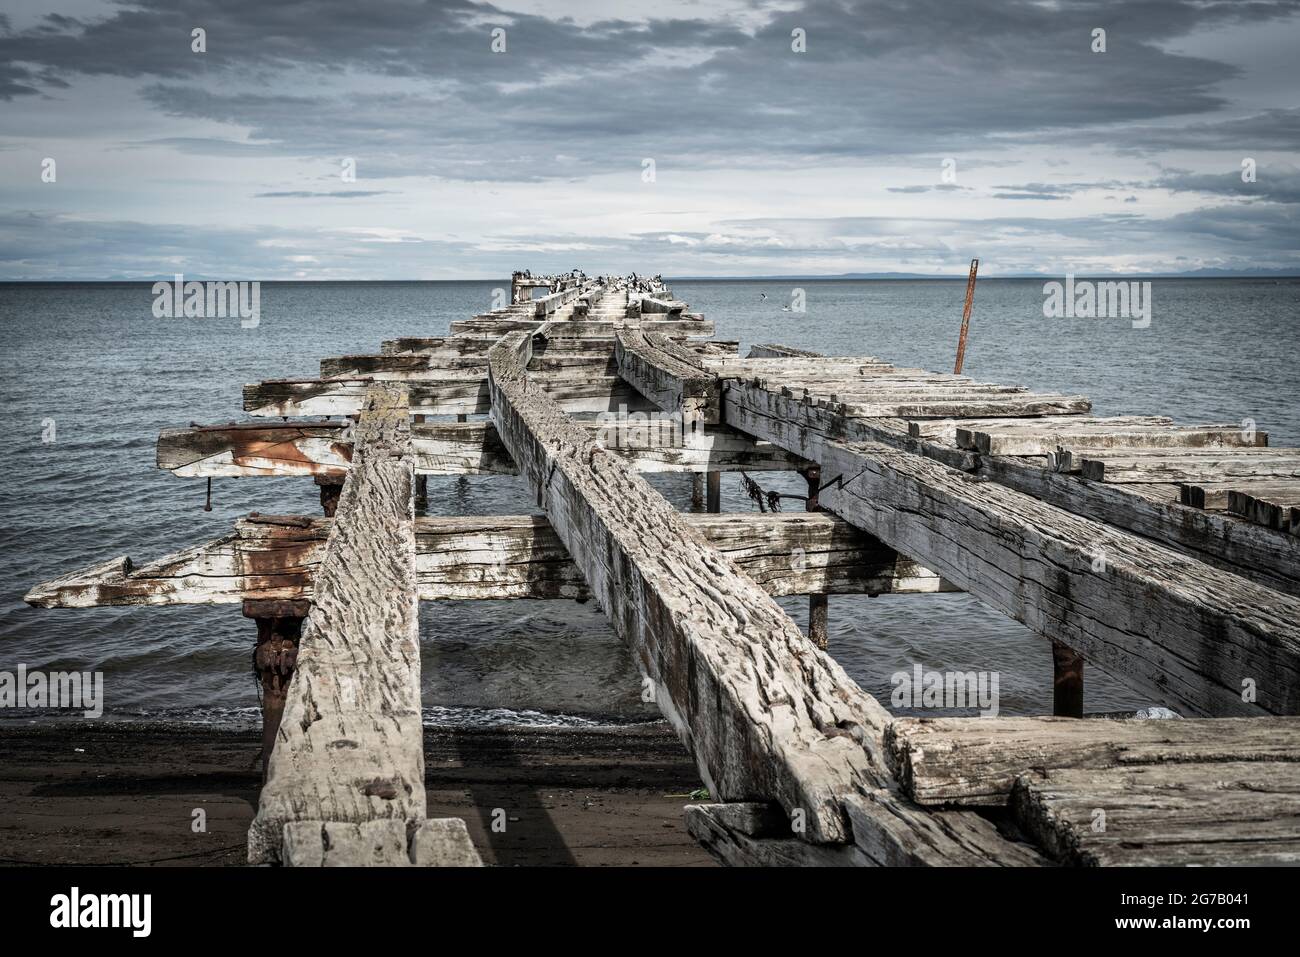 Jetty at the end of the world, Punta Arenas, Chile Stock Photo